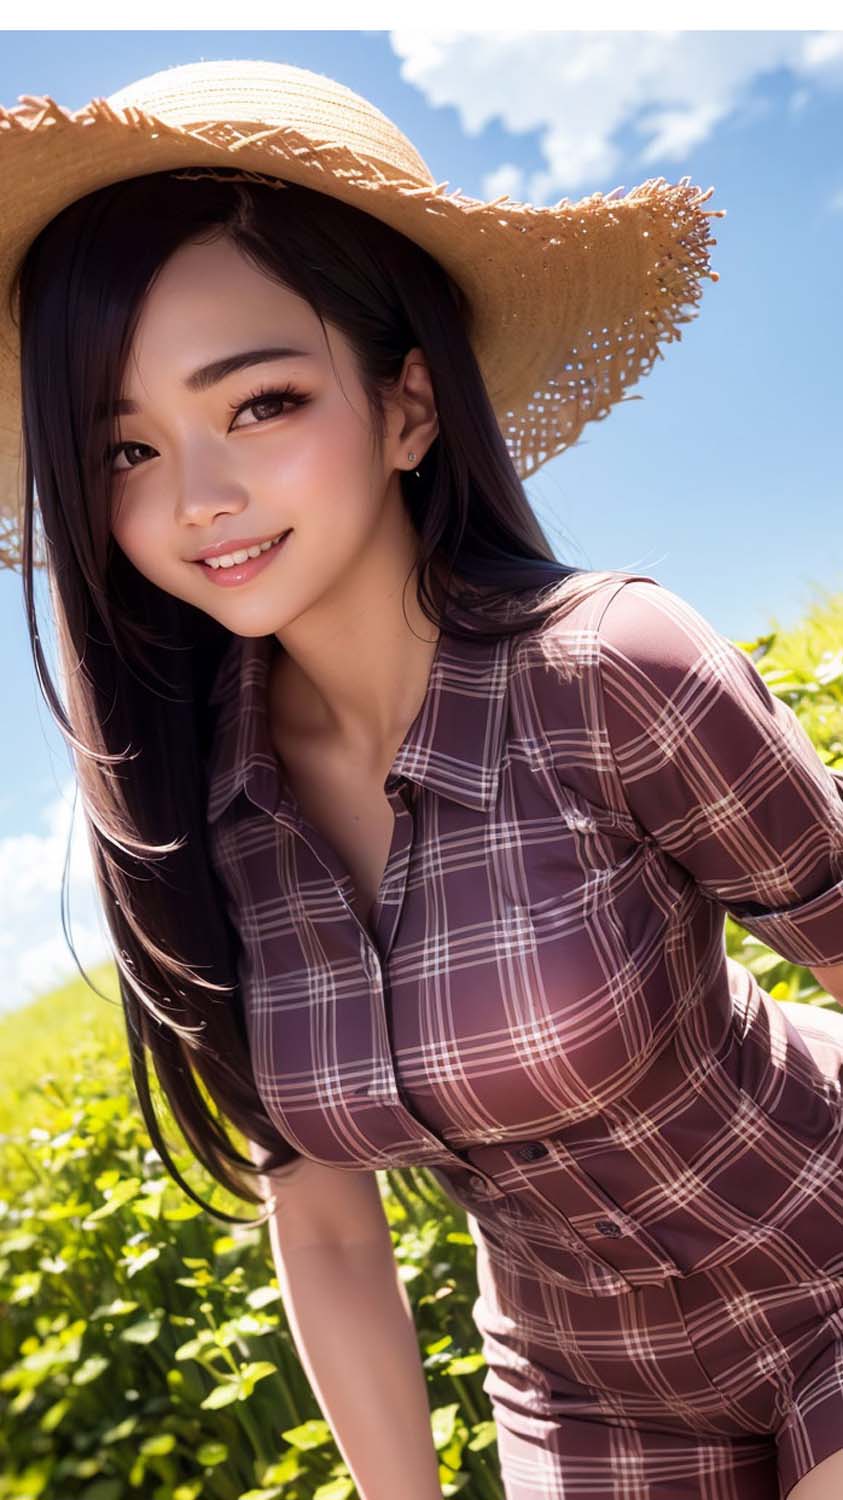 Cute Asian Girl with Hat iPhone Wallpaper HD